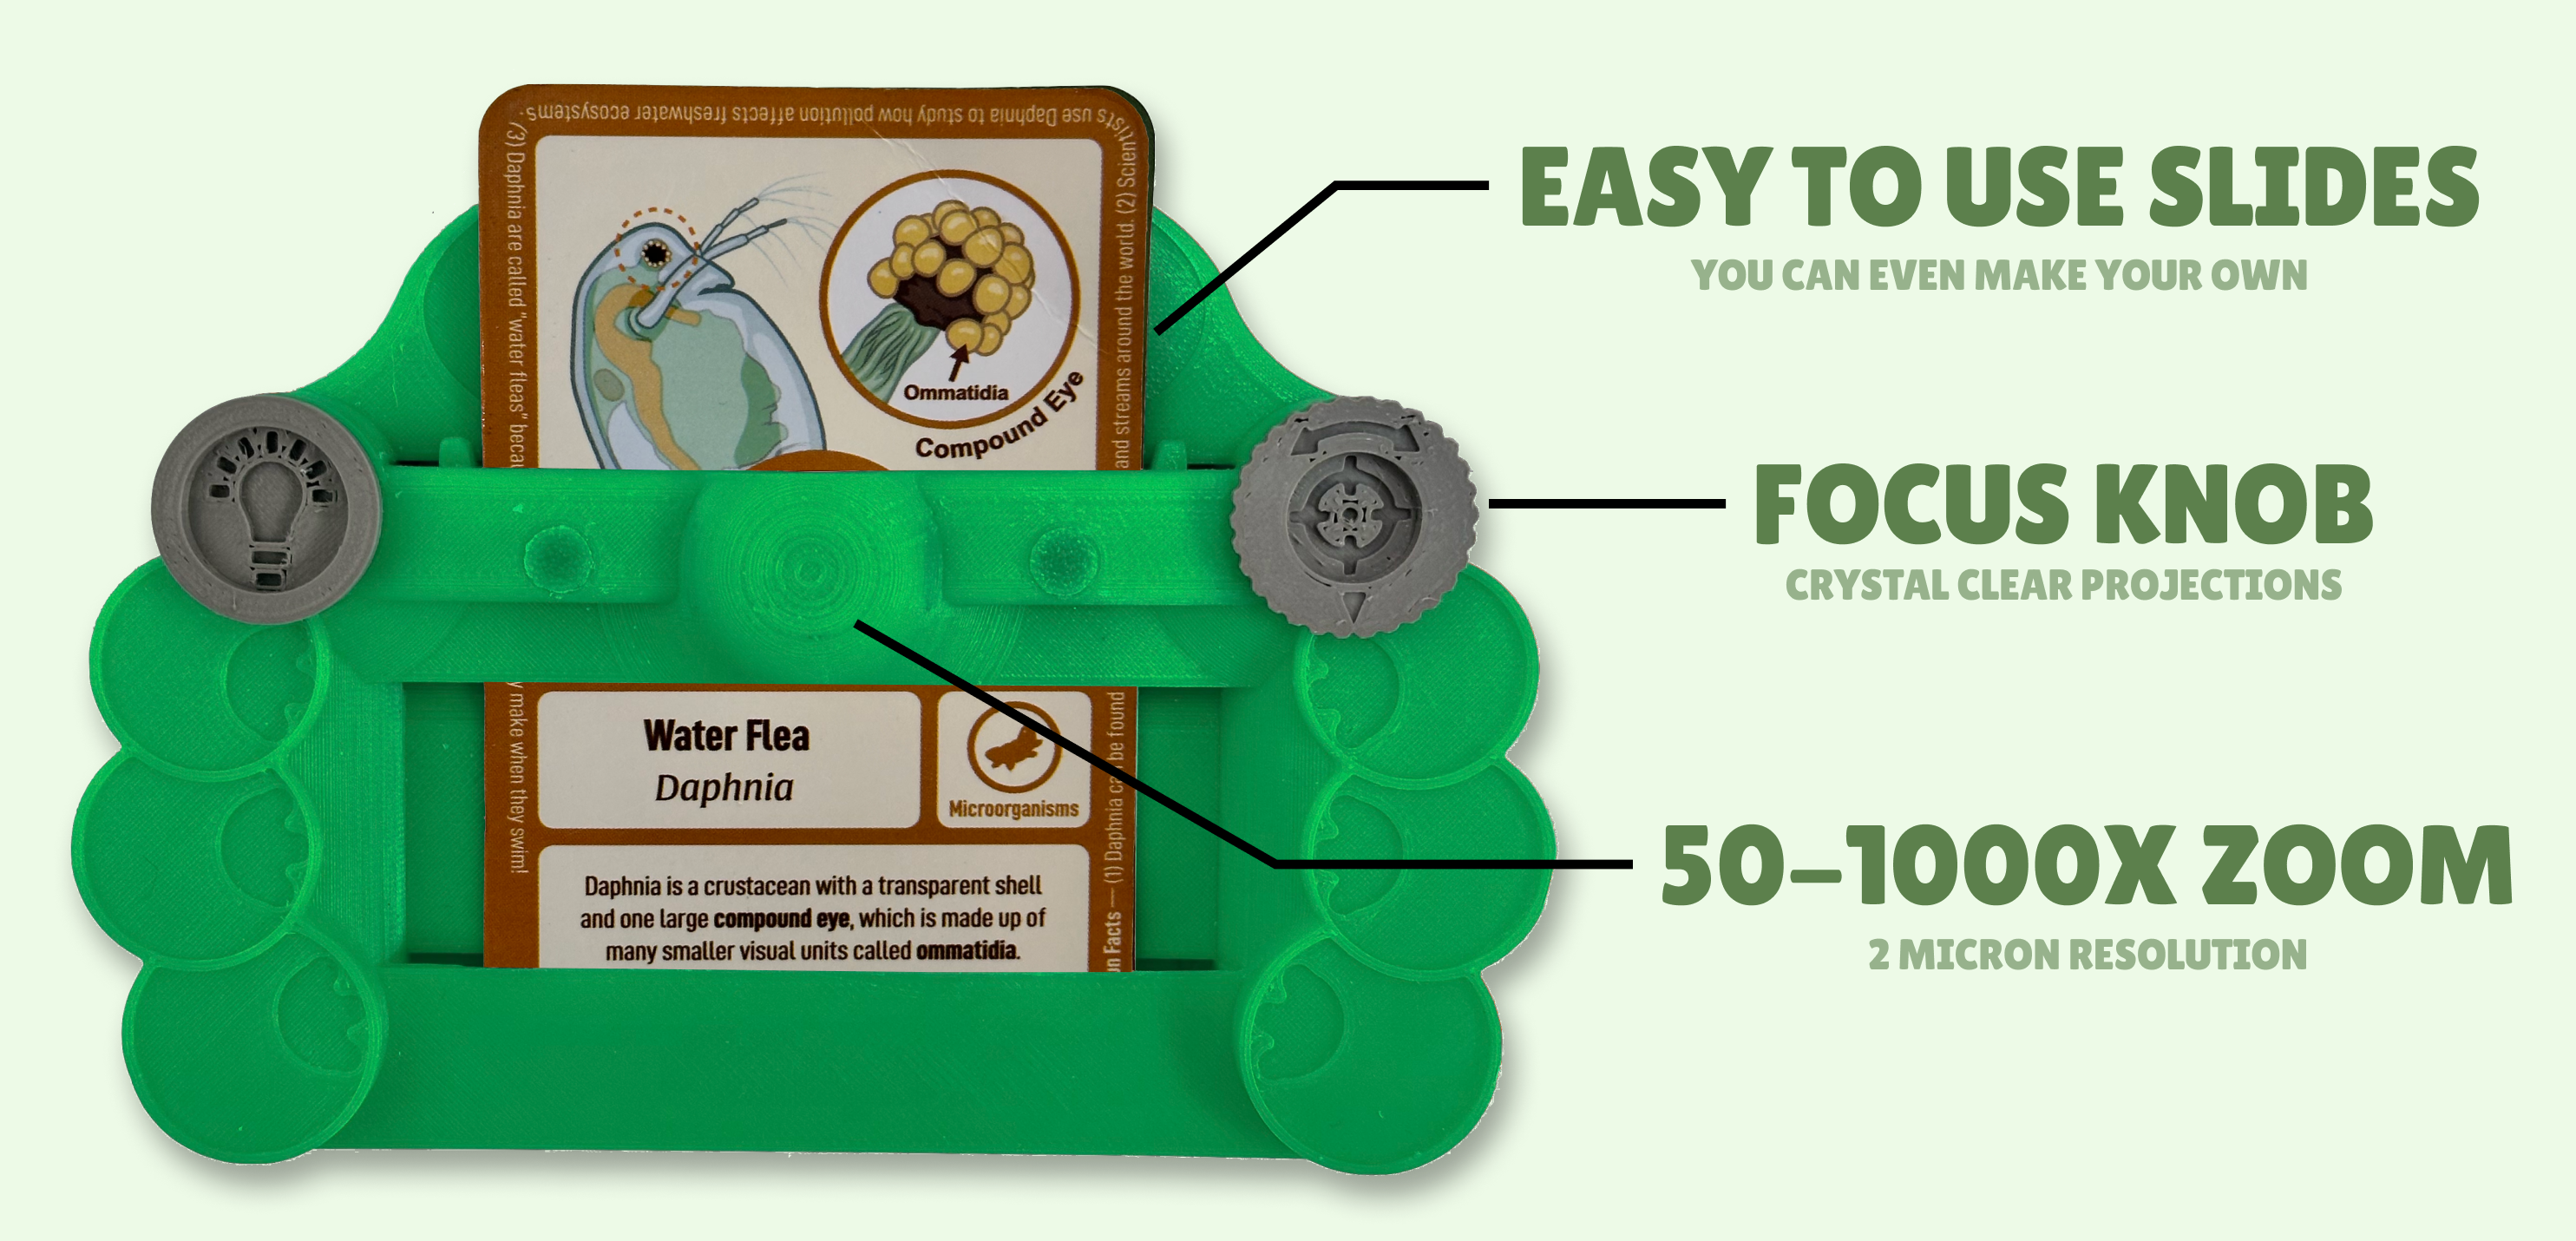 A diagram of the MicroRealms Projector with the words "Easy to use slides" pointing at the trading card in the projector, the words "Focus knob" pointing at the grey wheel on the right, and "50-1000x Zoom" pointing to the device lens in the center.